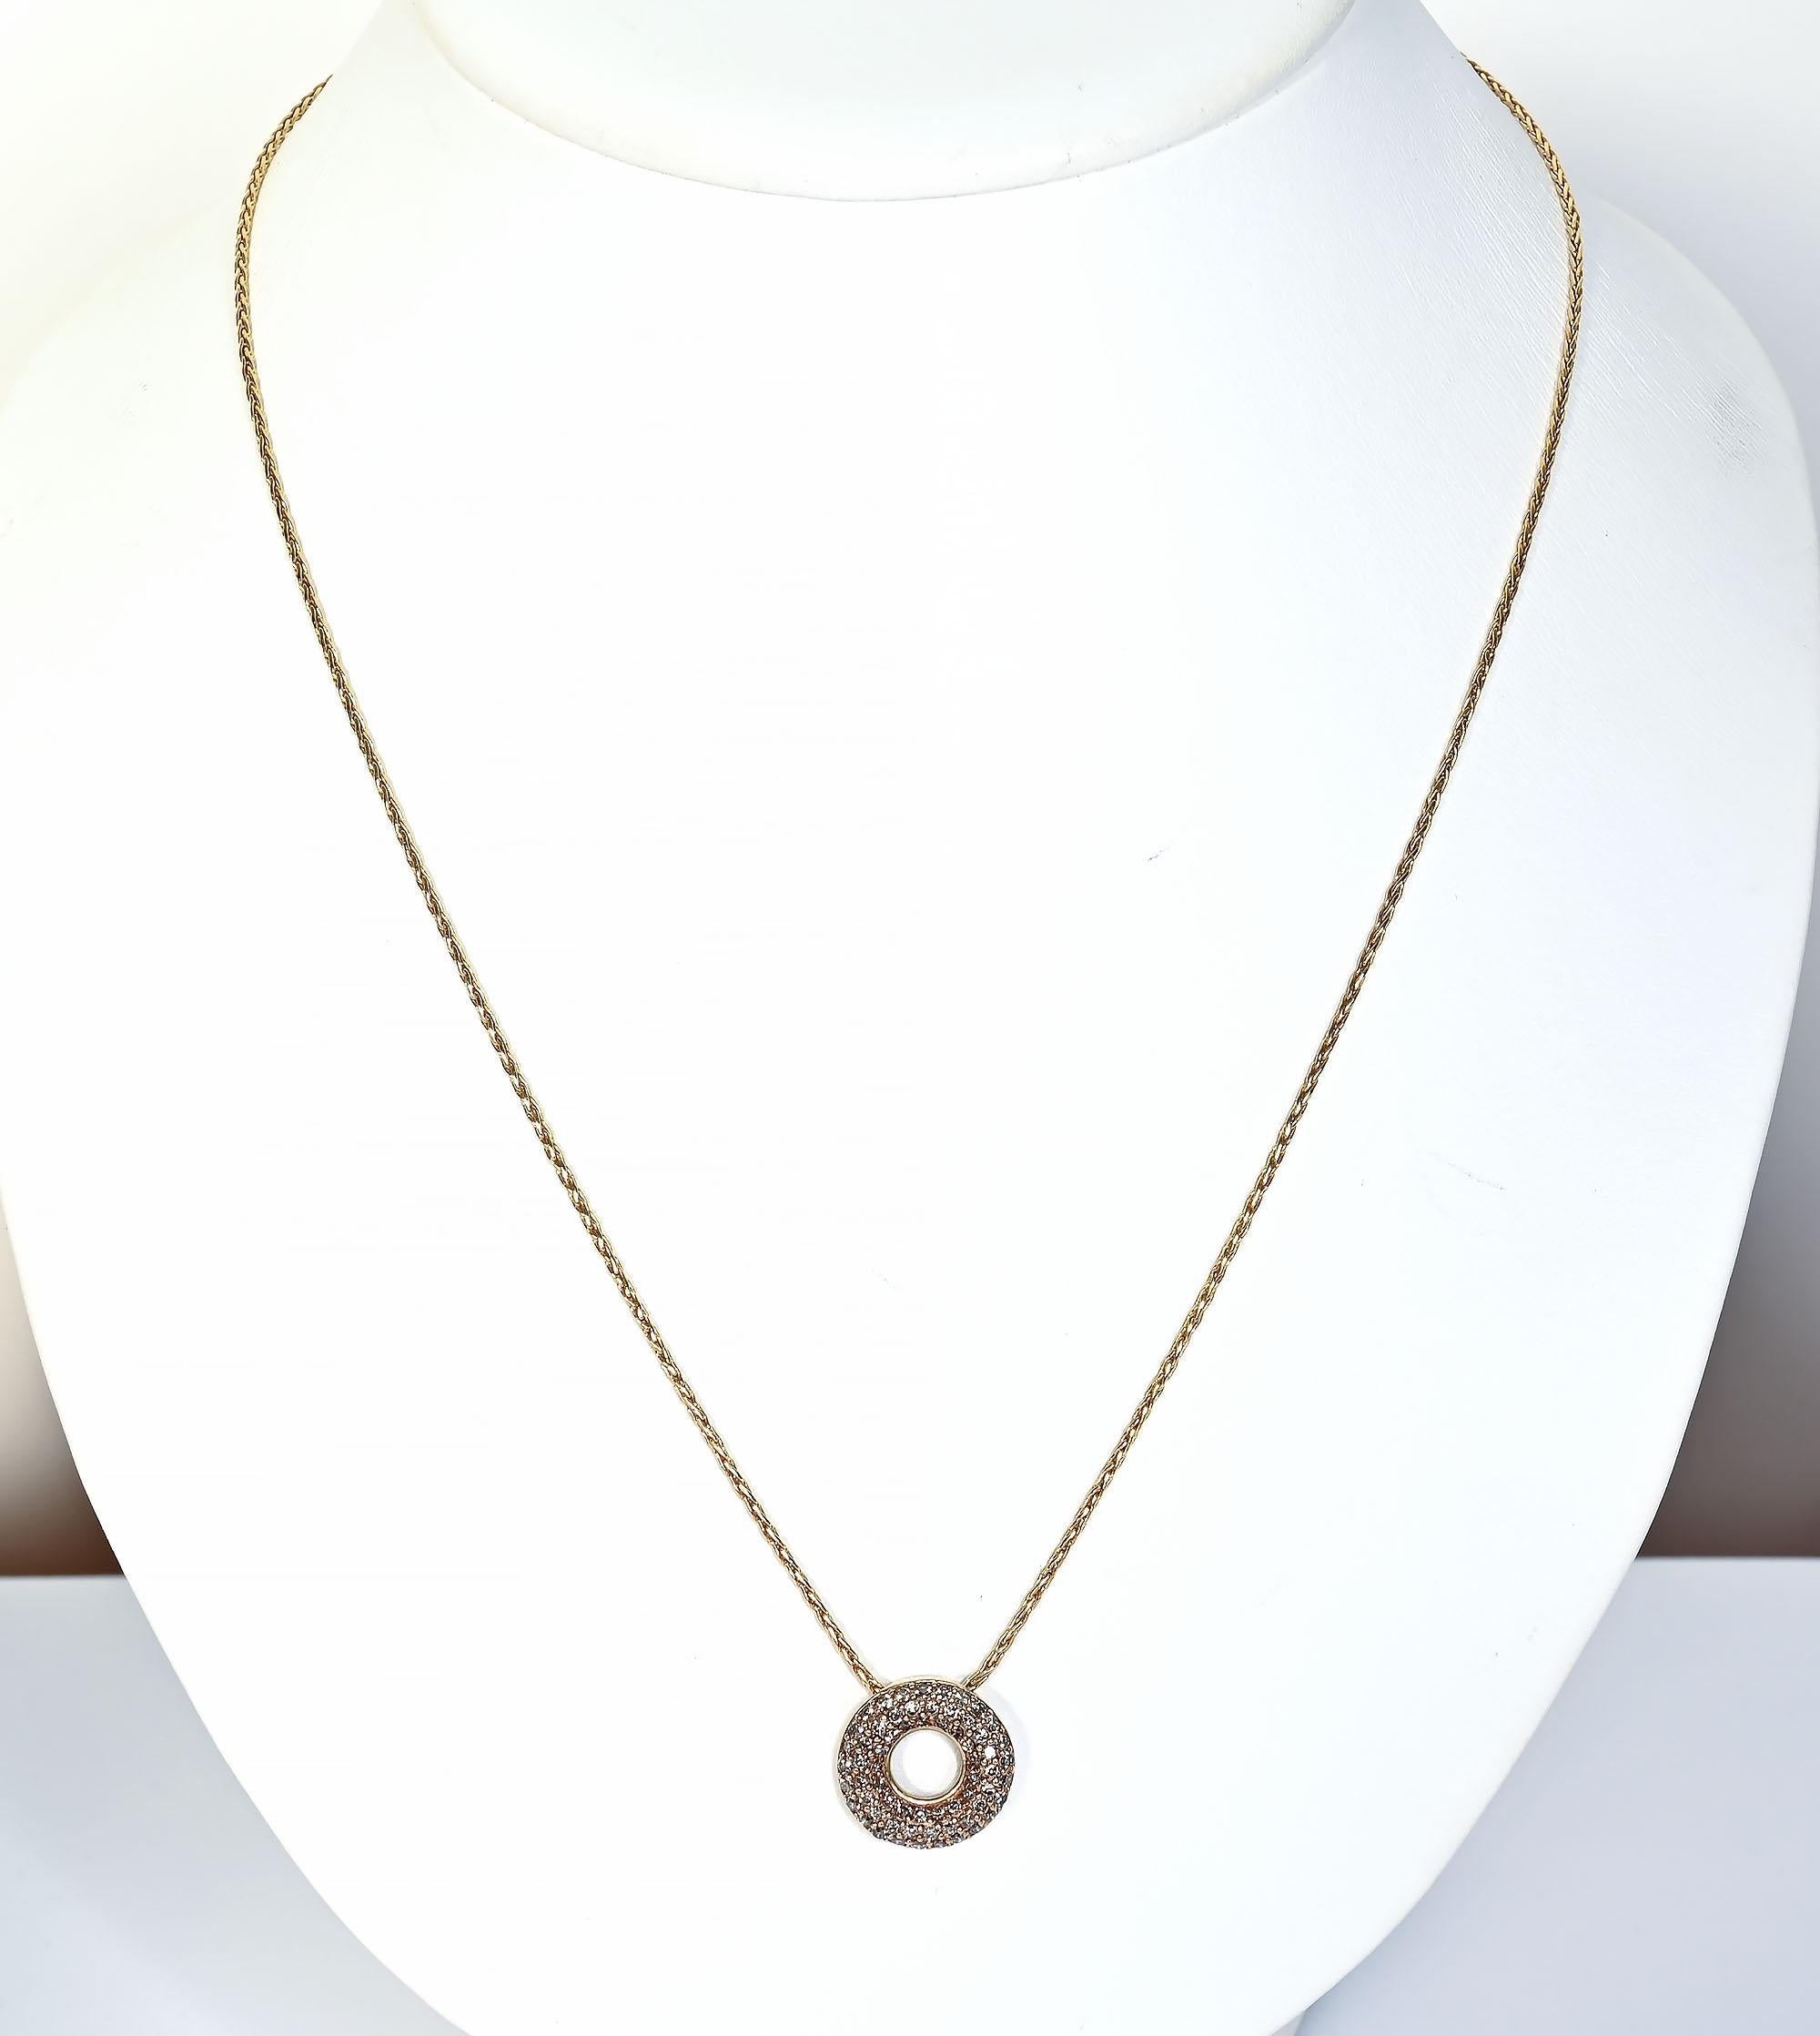 Round pendant necklace with approximately 1 carat of champagne colored diamonds. The pendant is 5/8